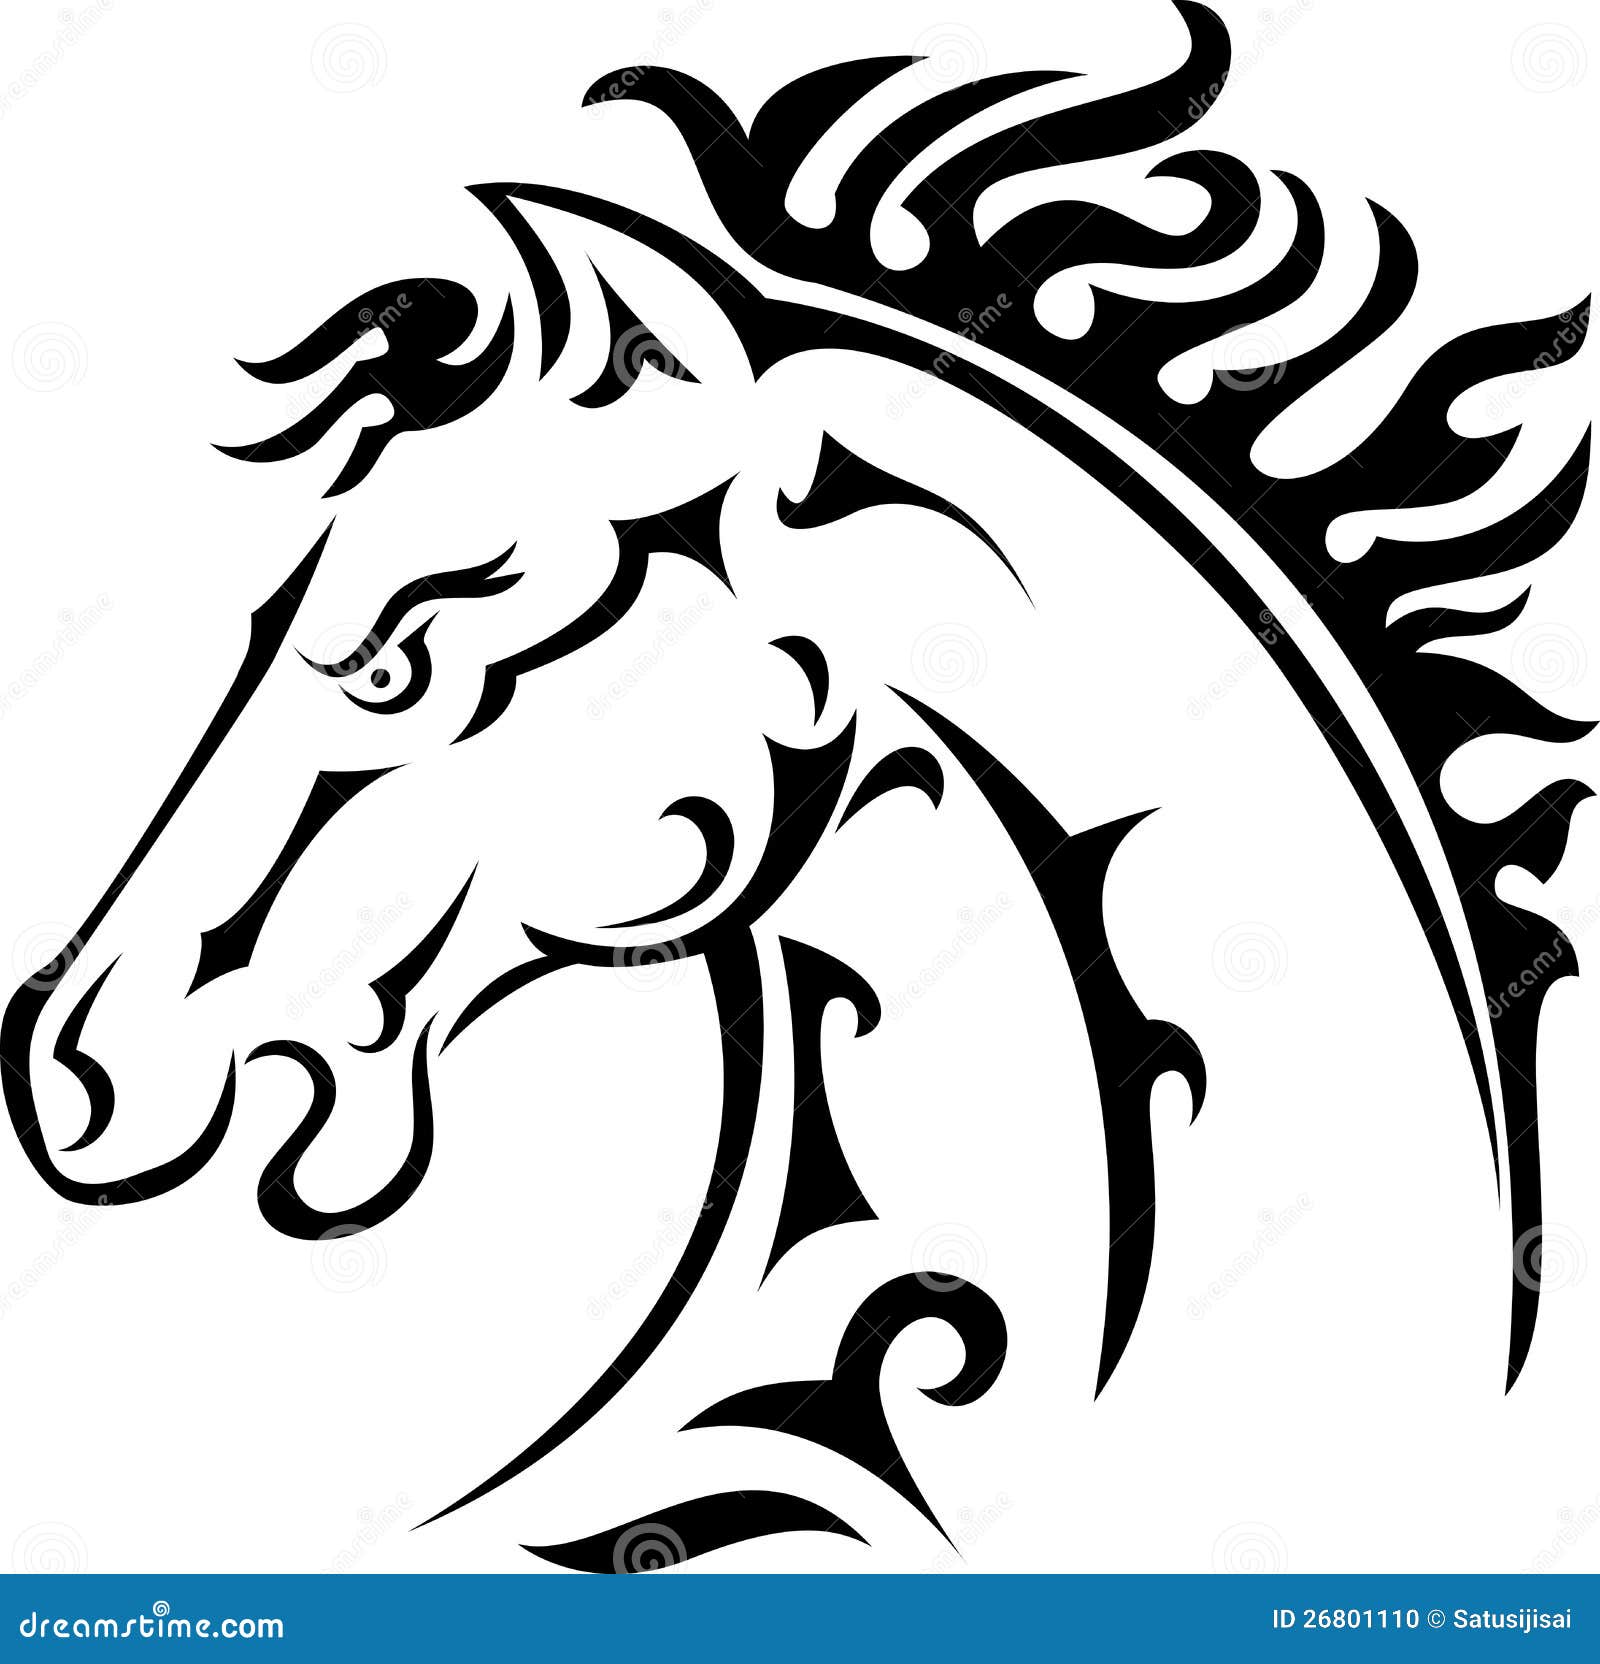 Horse Face Tattoo Vector Images over 530